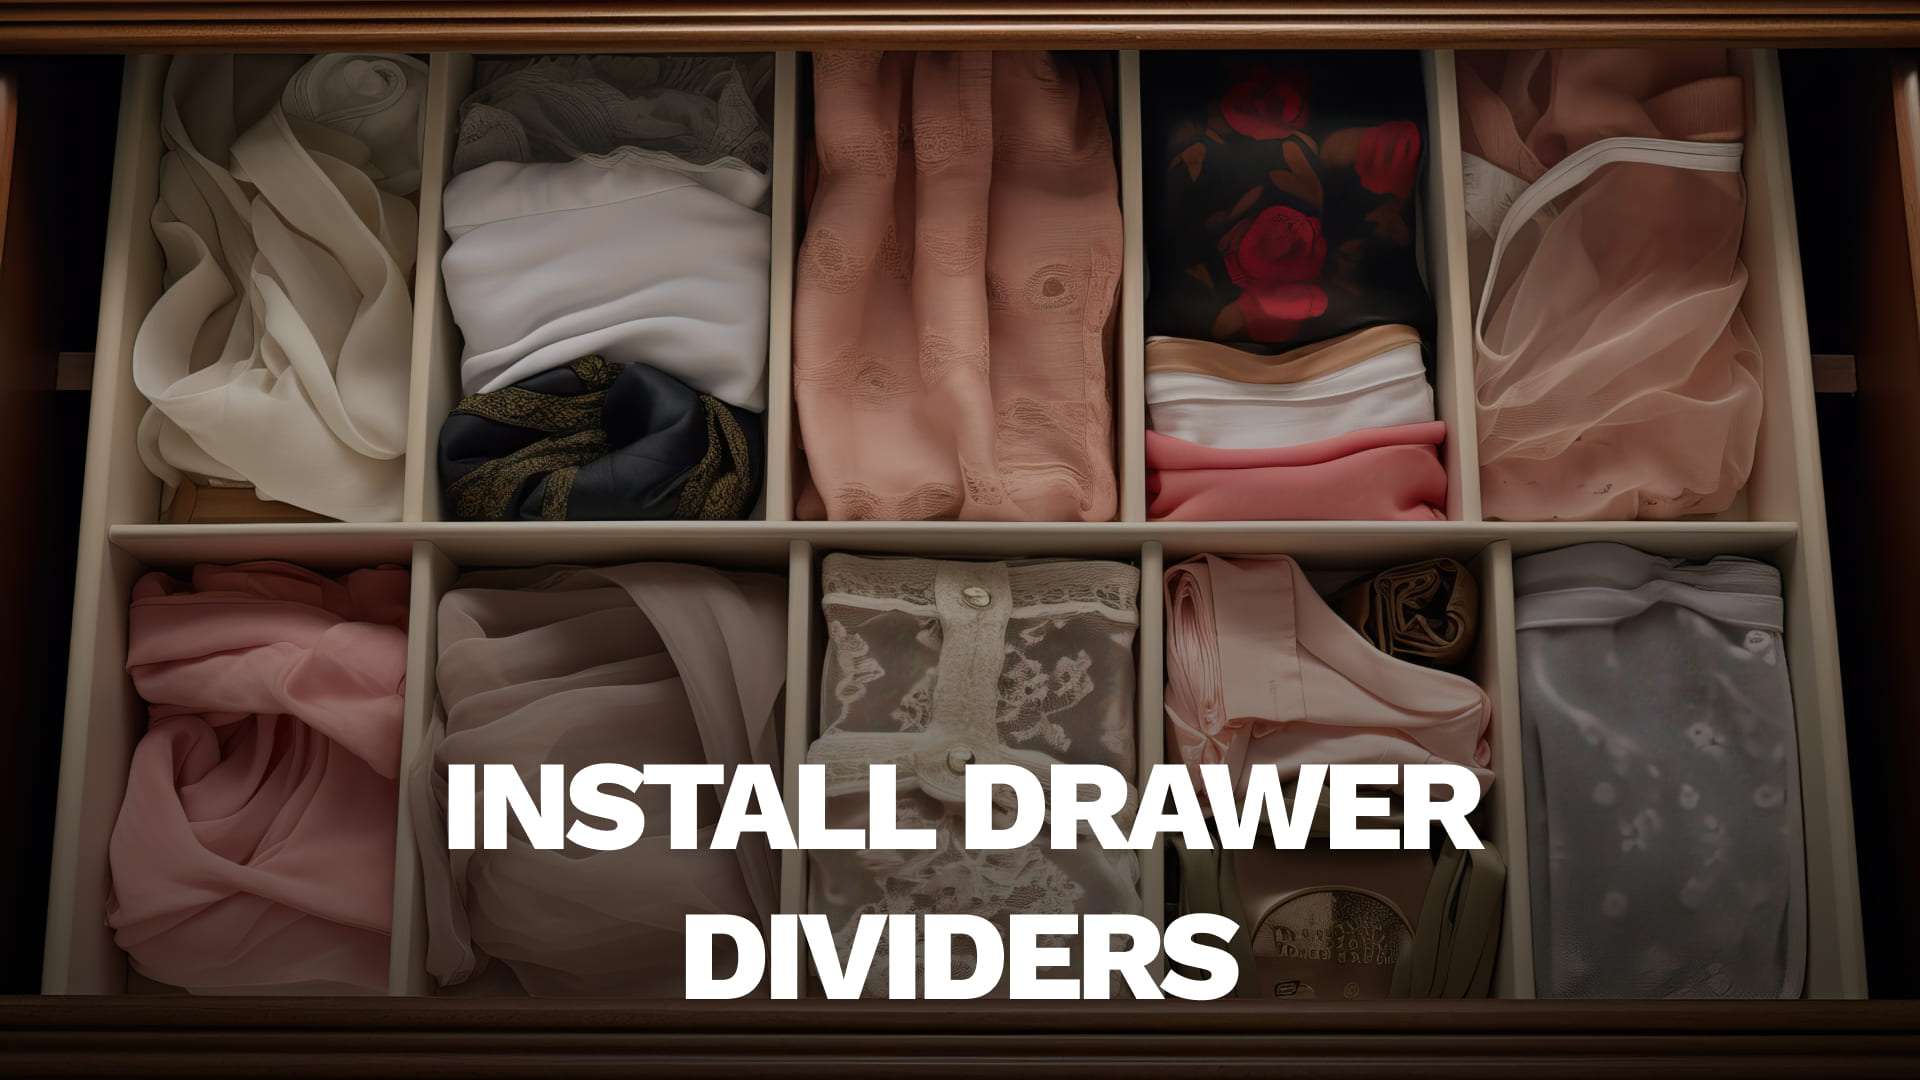 Install Drawer Dividers